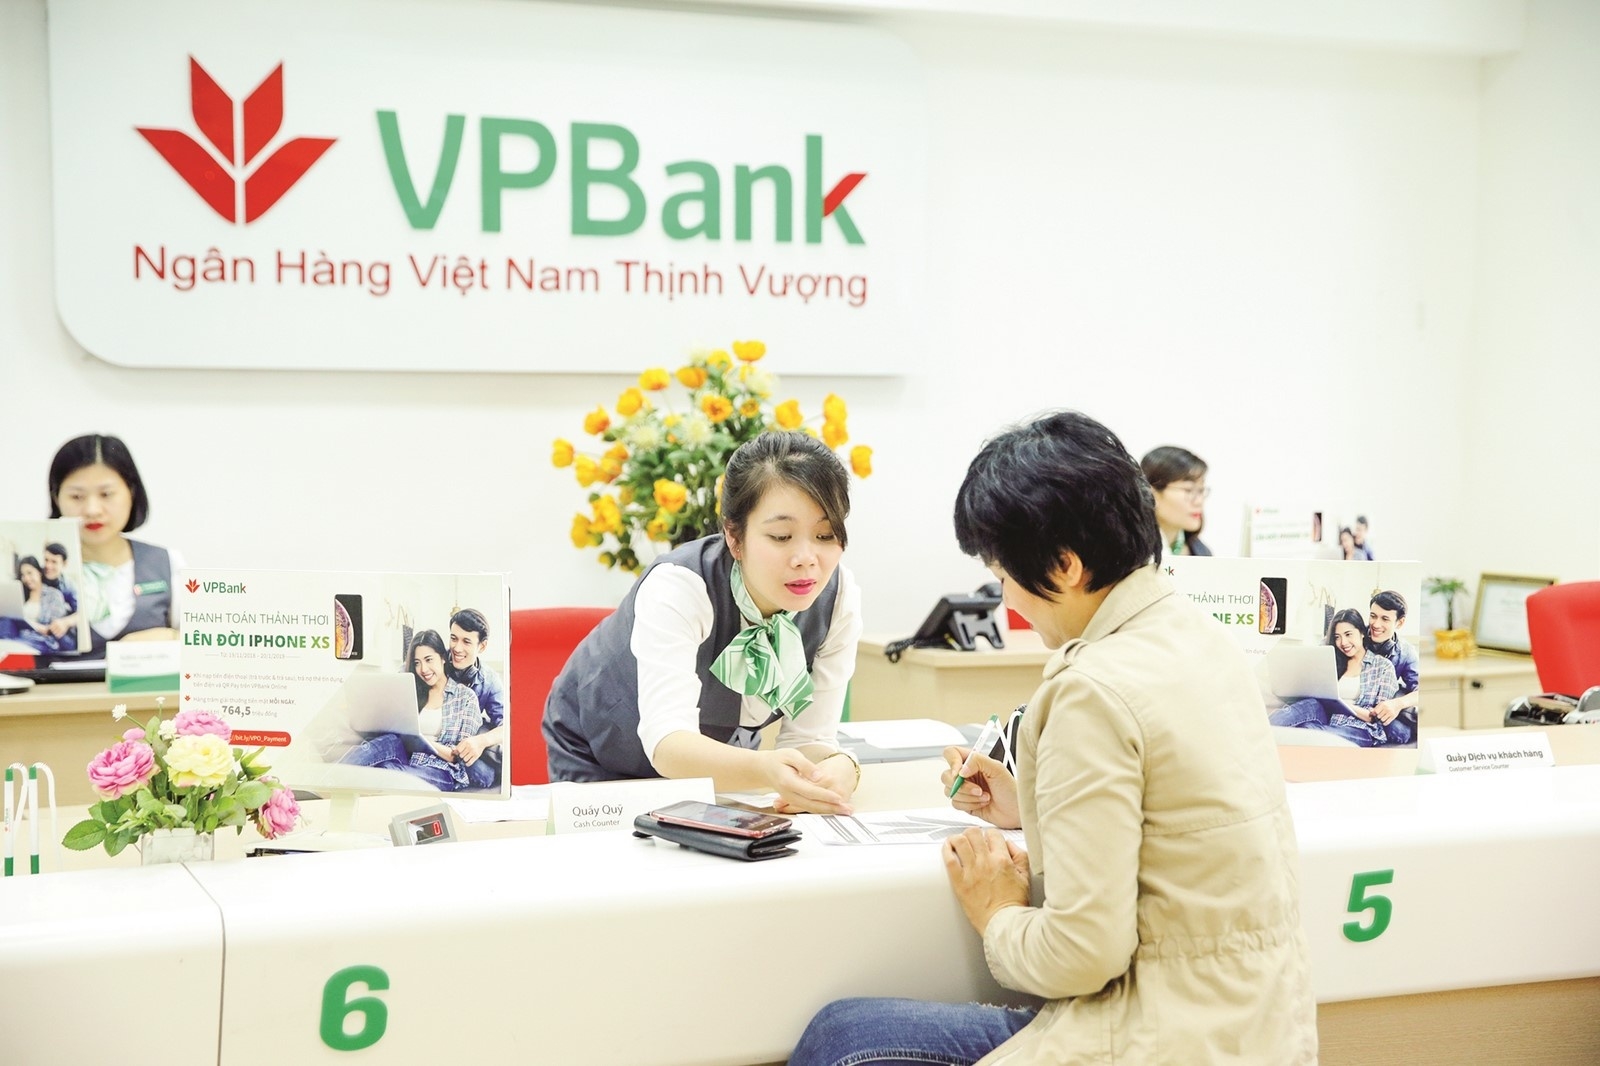 How Circular 03 on debt rescheduling and rates exemption affect to Vietnamese banks